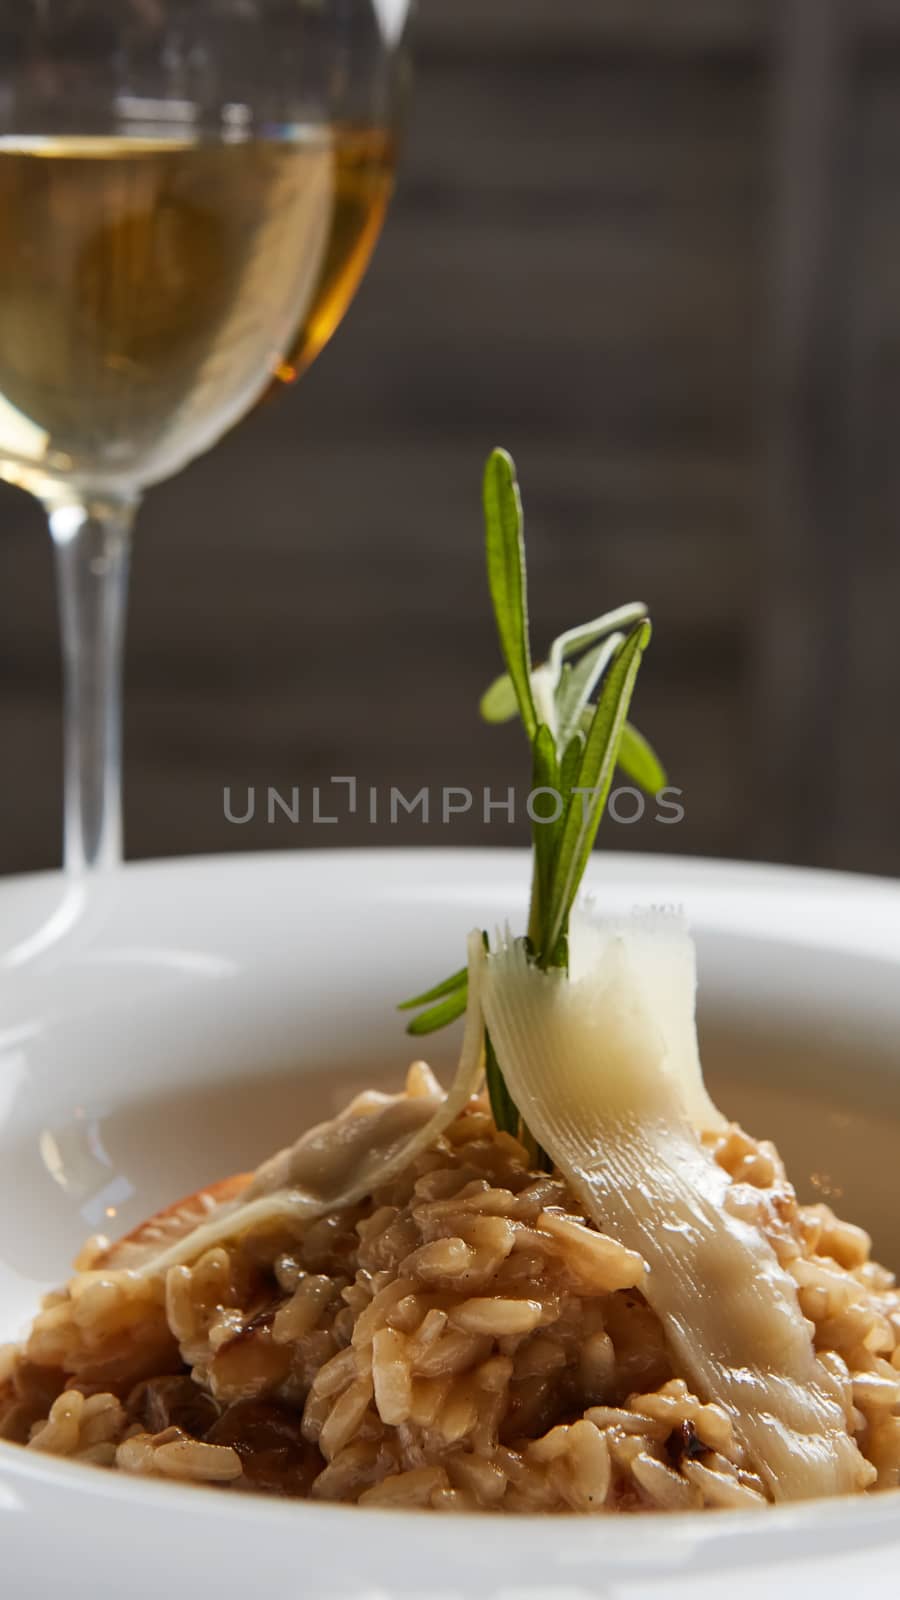 Italian dish risotto with wild white mushrooms and Parmesan cheese in a white plate